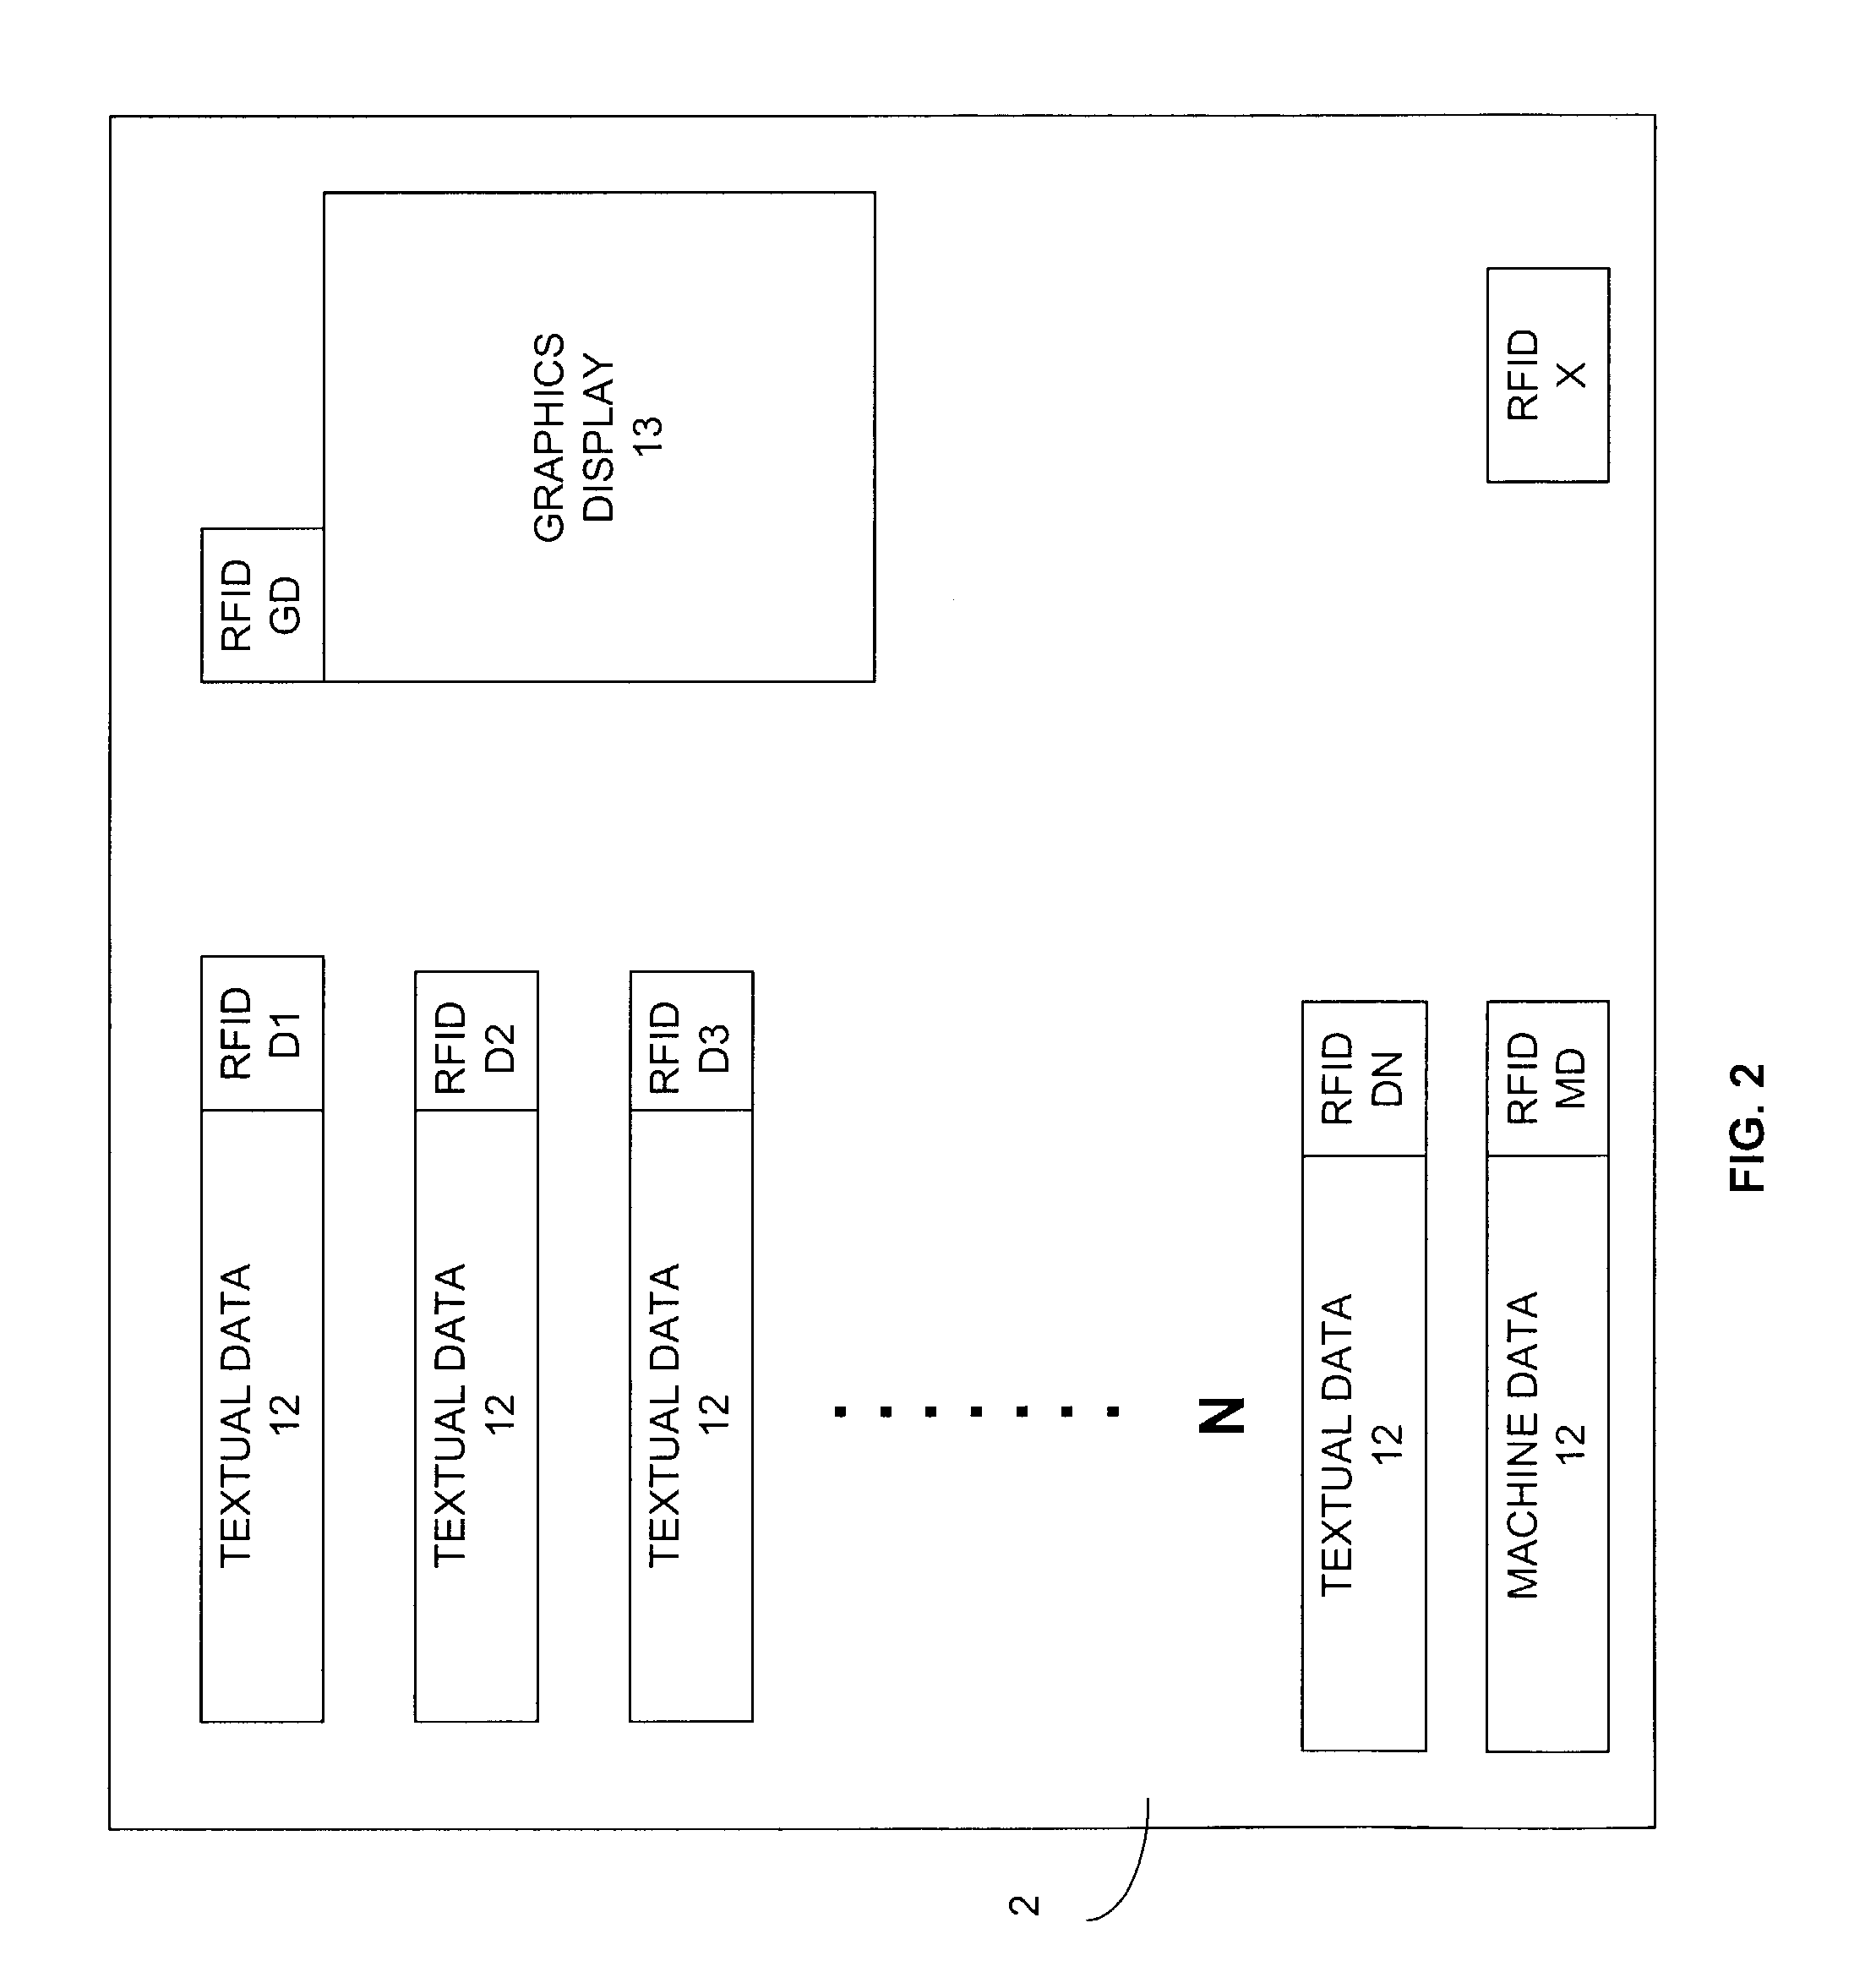 Apparatus, system, method and computer program product for implementing an automatic identification system with a personal communication device to improve functionality